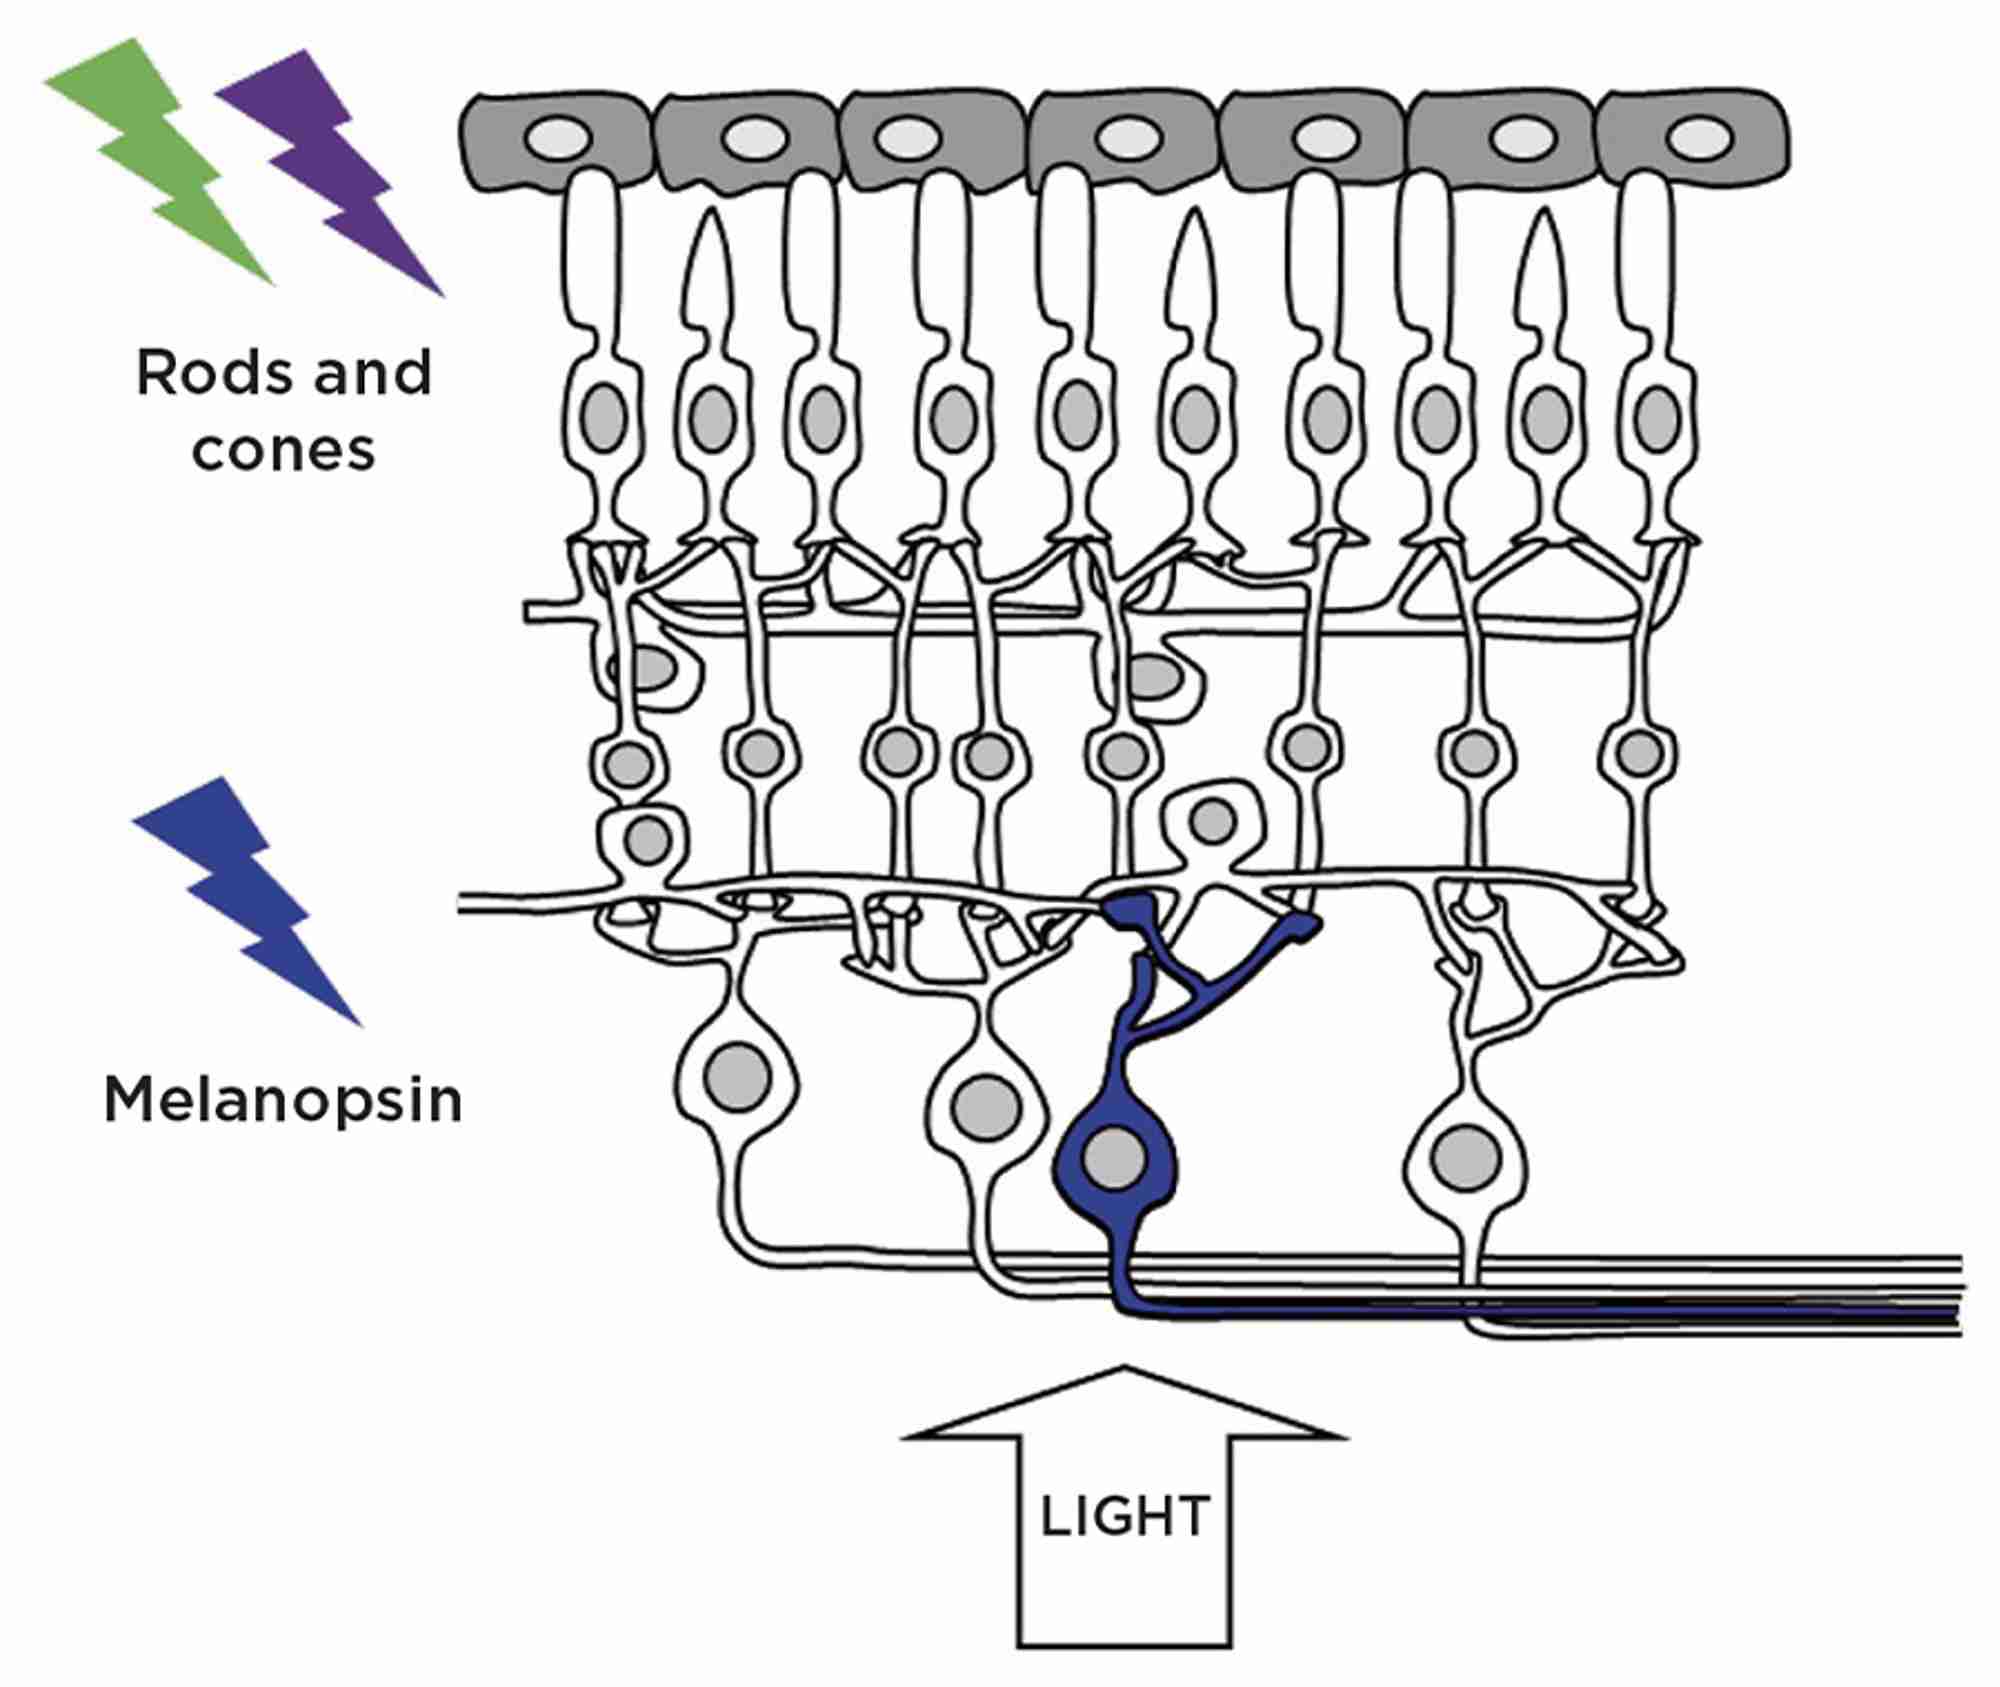 Figure 1. Retinal photoreceptors: in addition to the rod and cone photoreceptors which mediate vision, a subset of photosensitive retinal ganglion cells (pRGCs) express the photopigment melanopsin and are critically important in the regulation of a wide range of non-imageforming responses to light. Credit: S.Peirson